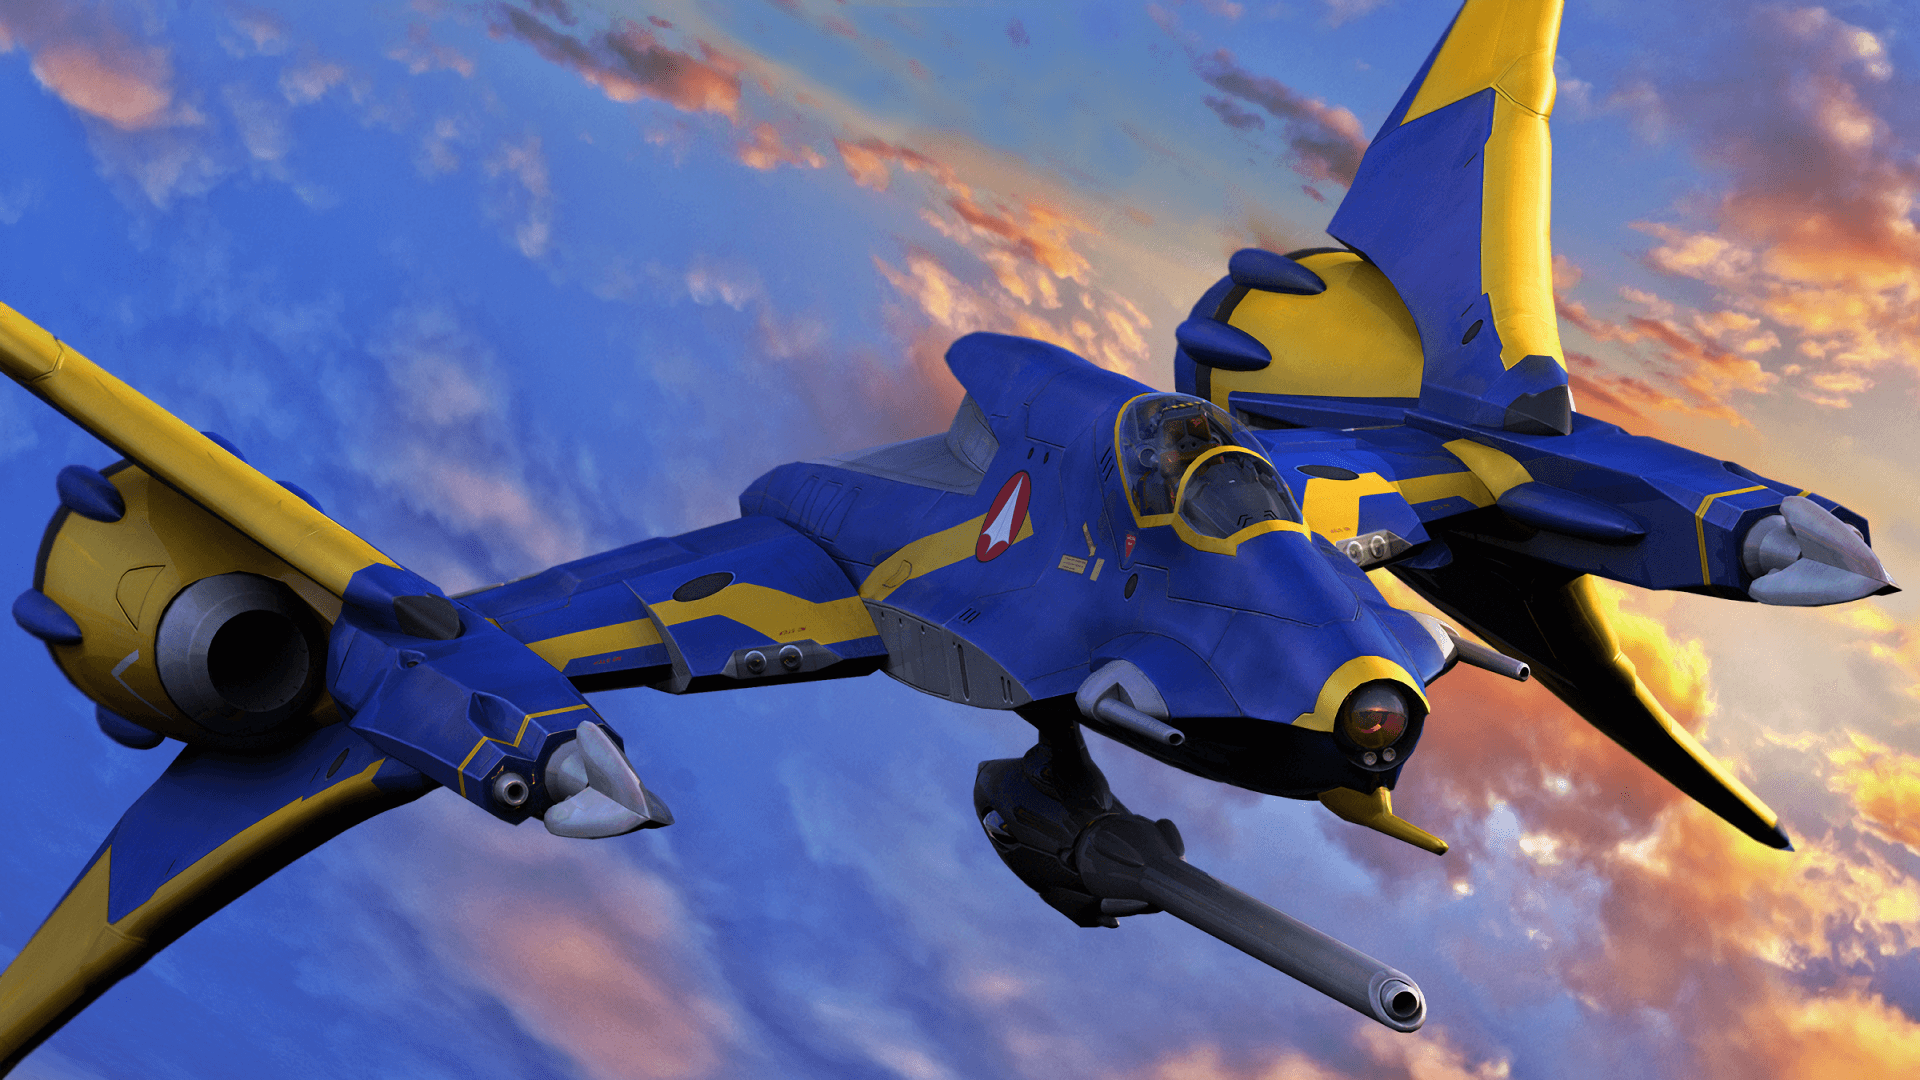 Valkyrie Mecha Jet Soaring Above The City In Macross Universe.